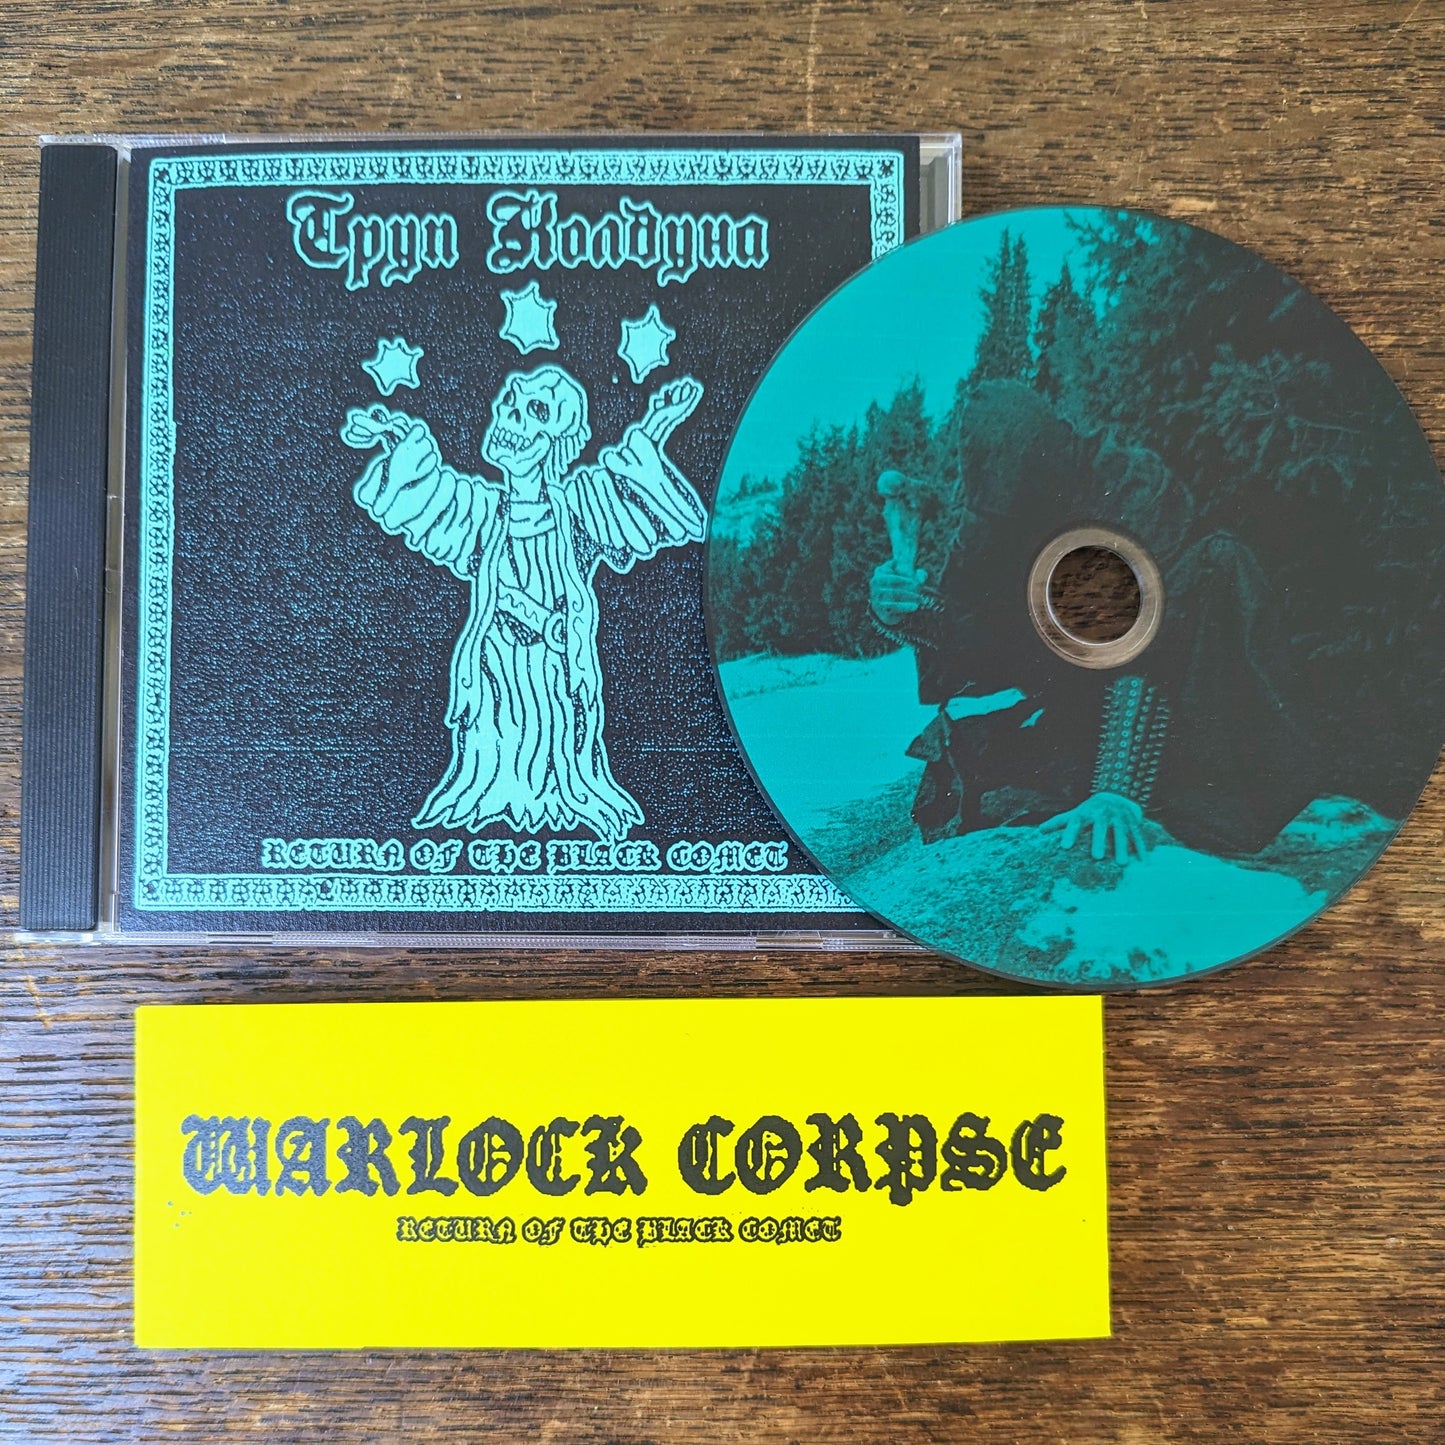 [SOLD OUT] WARLOCK CORPSE "Return of the Black Comet" CD [w/ OBI, lim.50]